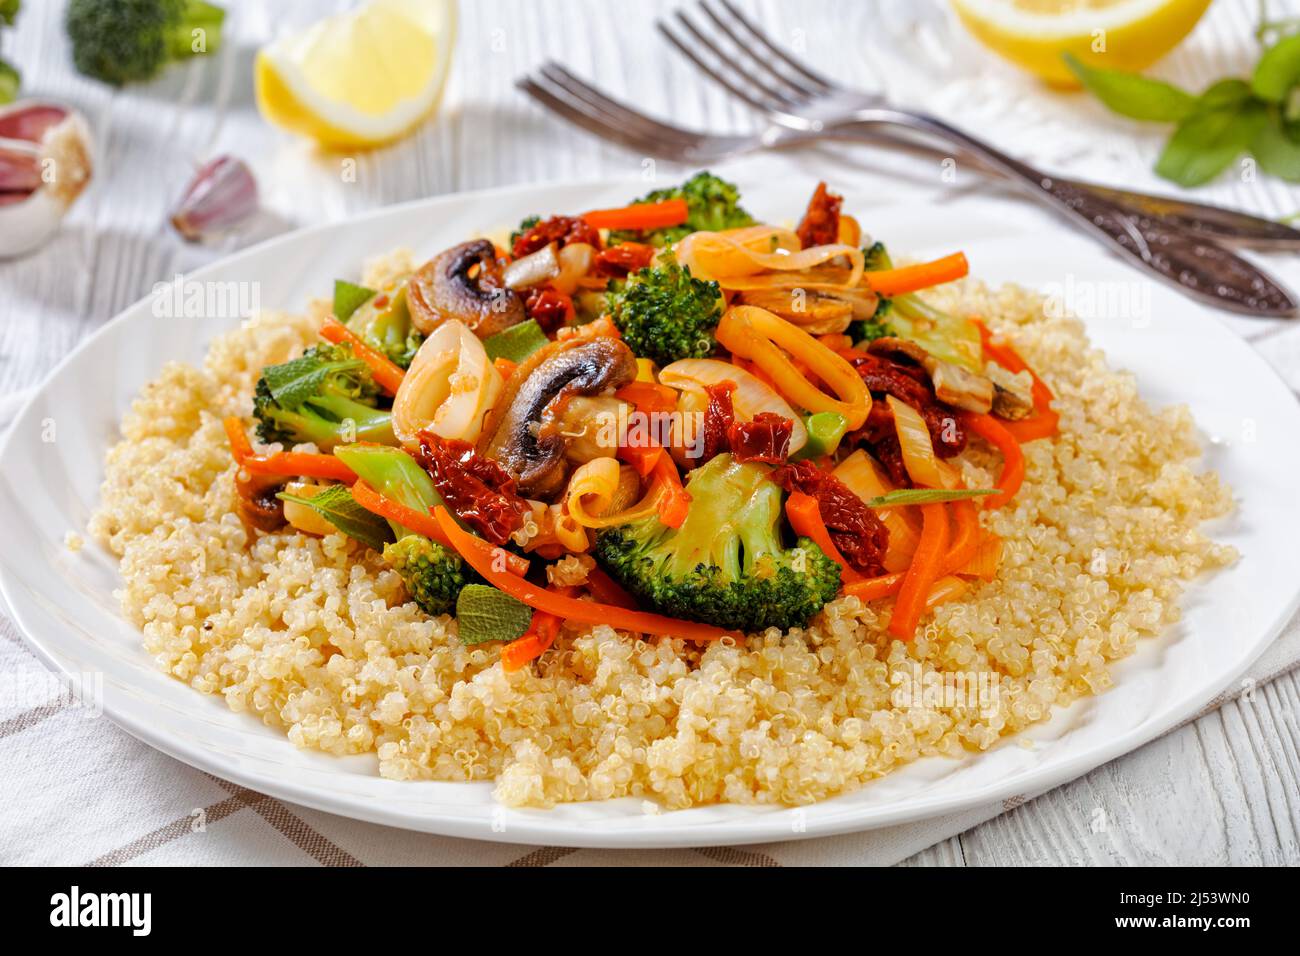 quinoa topped with stir fried broccoli, julienne carrots, sun dried tomatoes, leek and mushrooms on white plate on white wooden table with ingredients Stock Photo